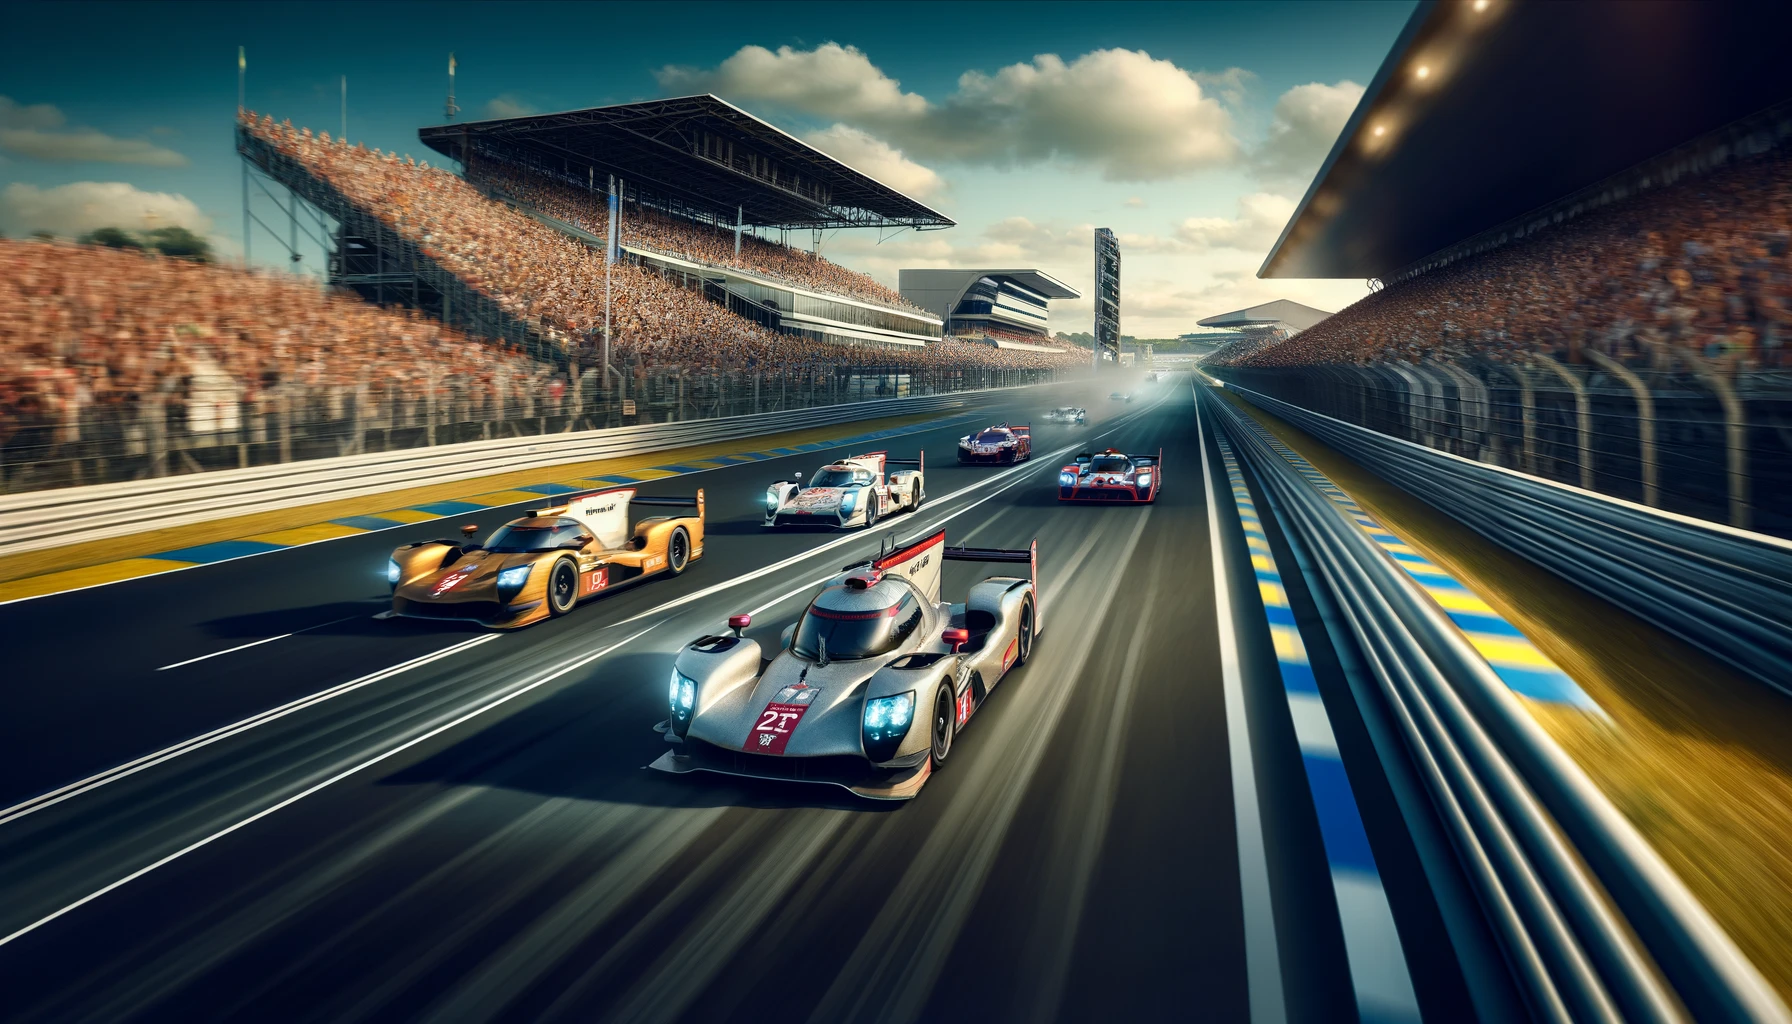 Cars racing at the Le Mans circuit